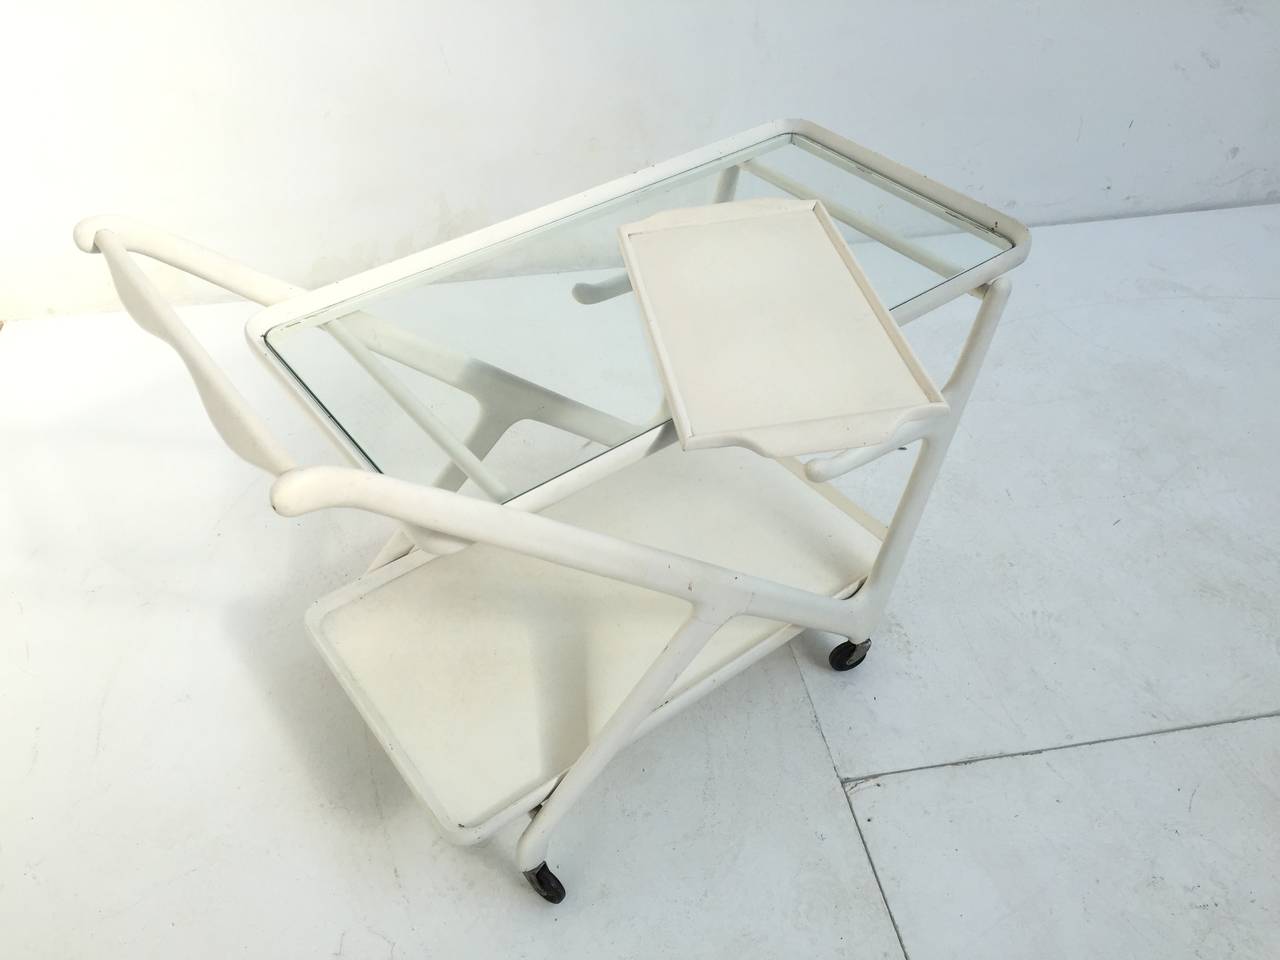 Unique white lacquered tea trolley or bar cart by Cesare Lacca for Cassina

In my opinion the white lacquer is period correct from when it was produced, or it has once been repainted but it has been done professionally 

An eye catching piece